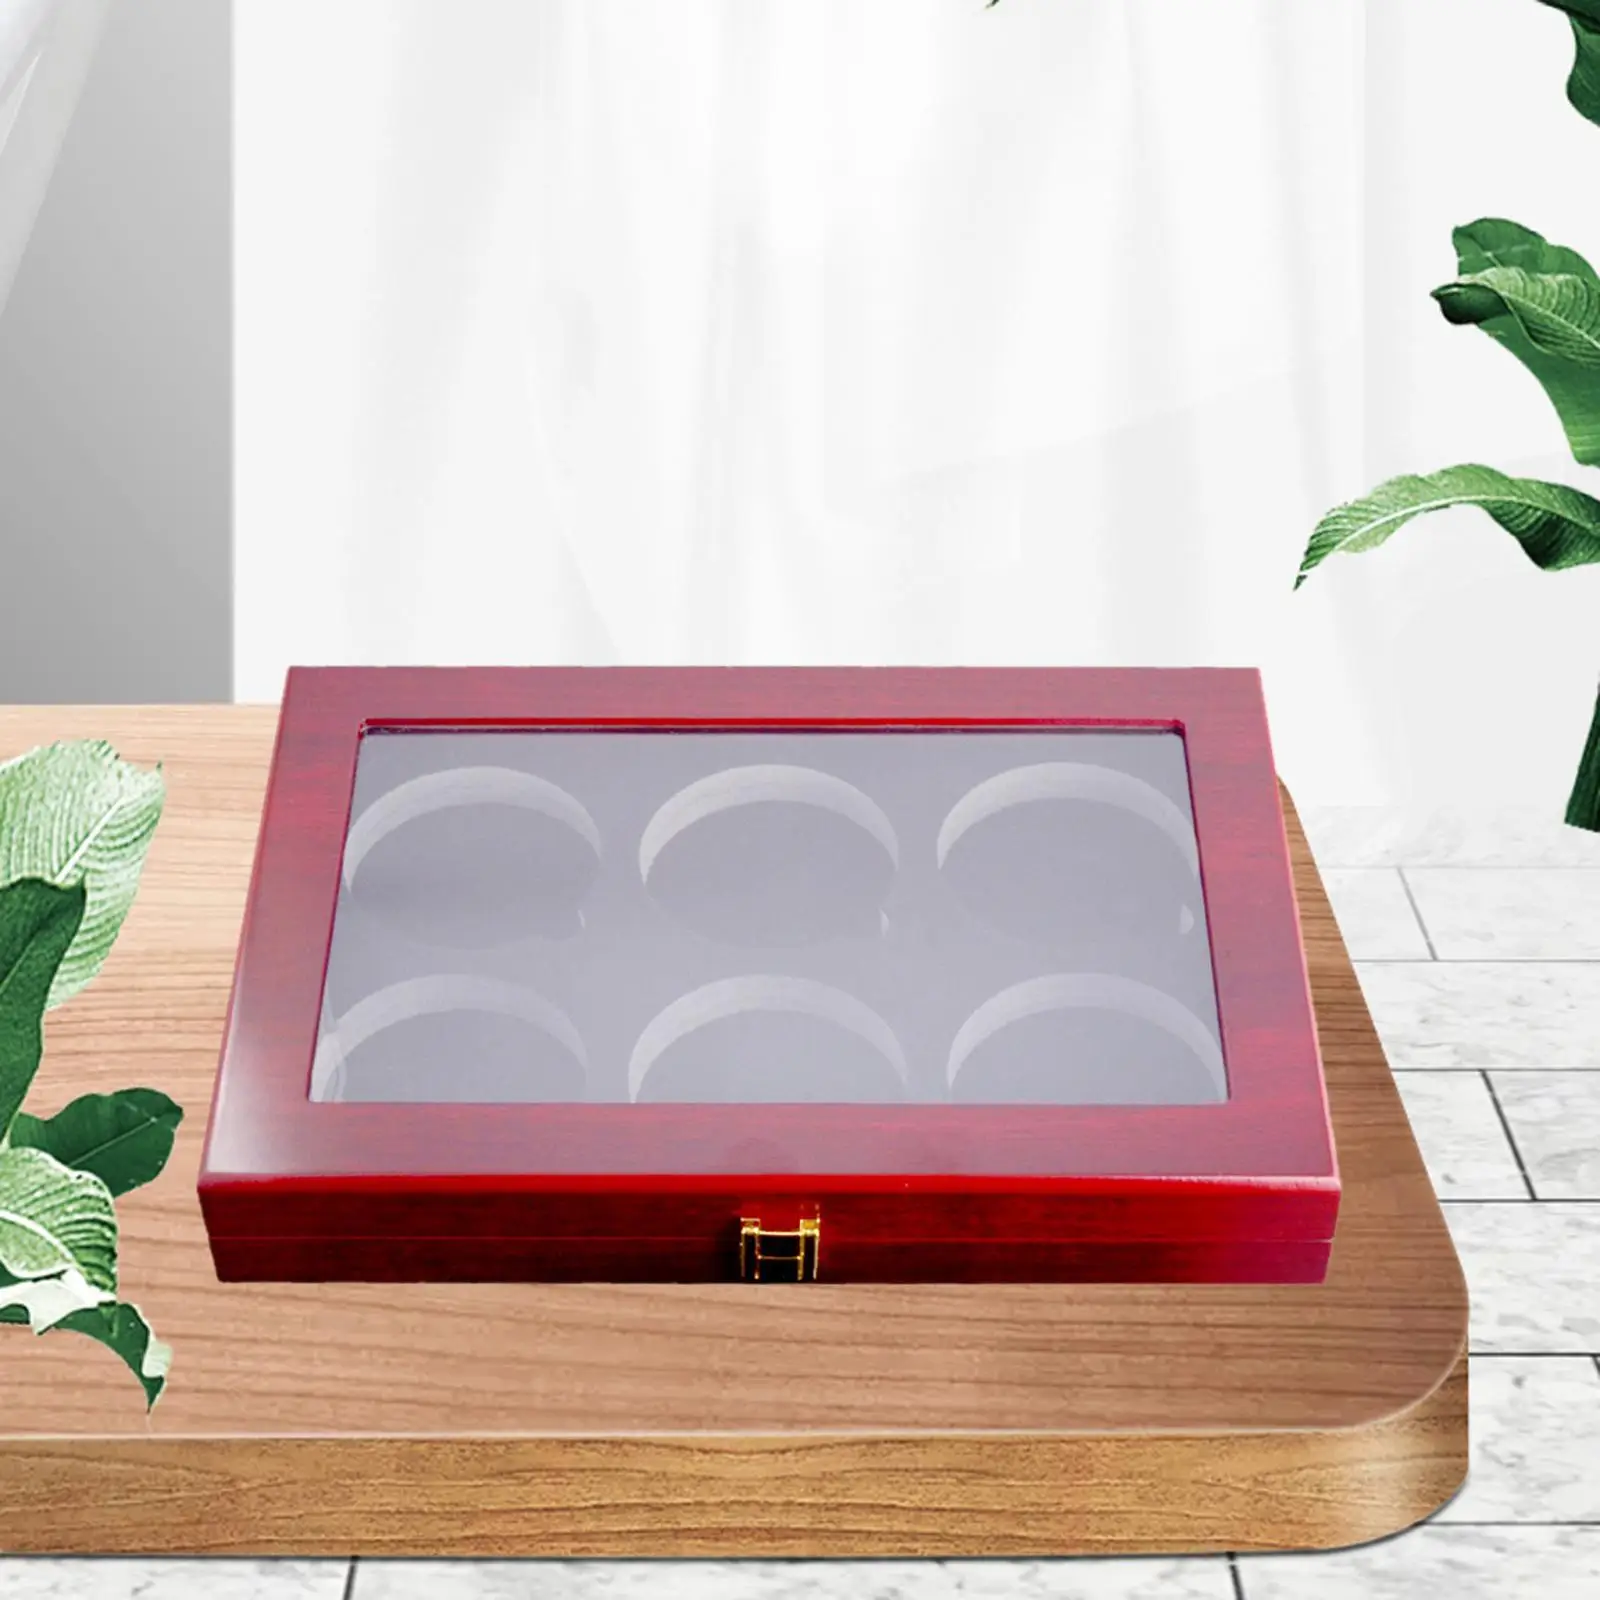 Hockey Puck Display Case Lockable Wooden with Protection Door Collection Shadow Box Hockey Puck Holder Cabinet Holder Rack